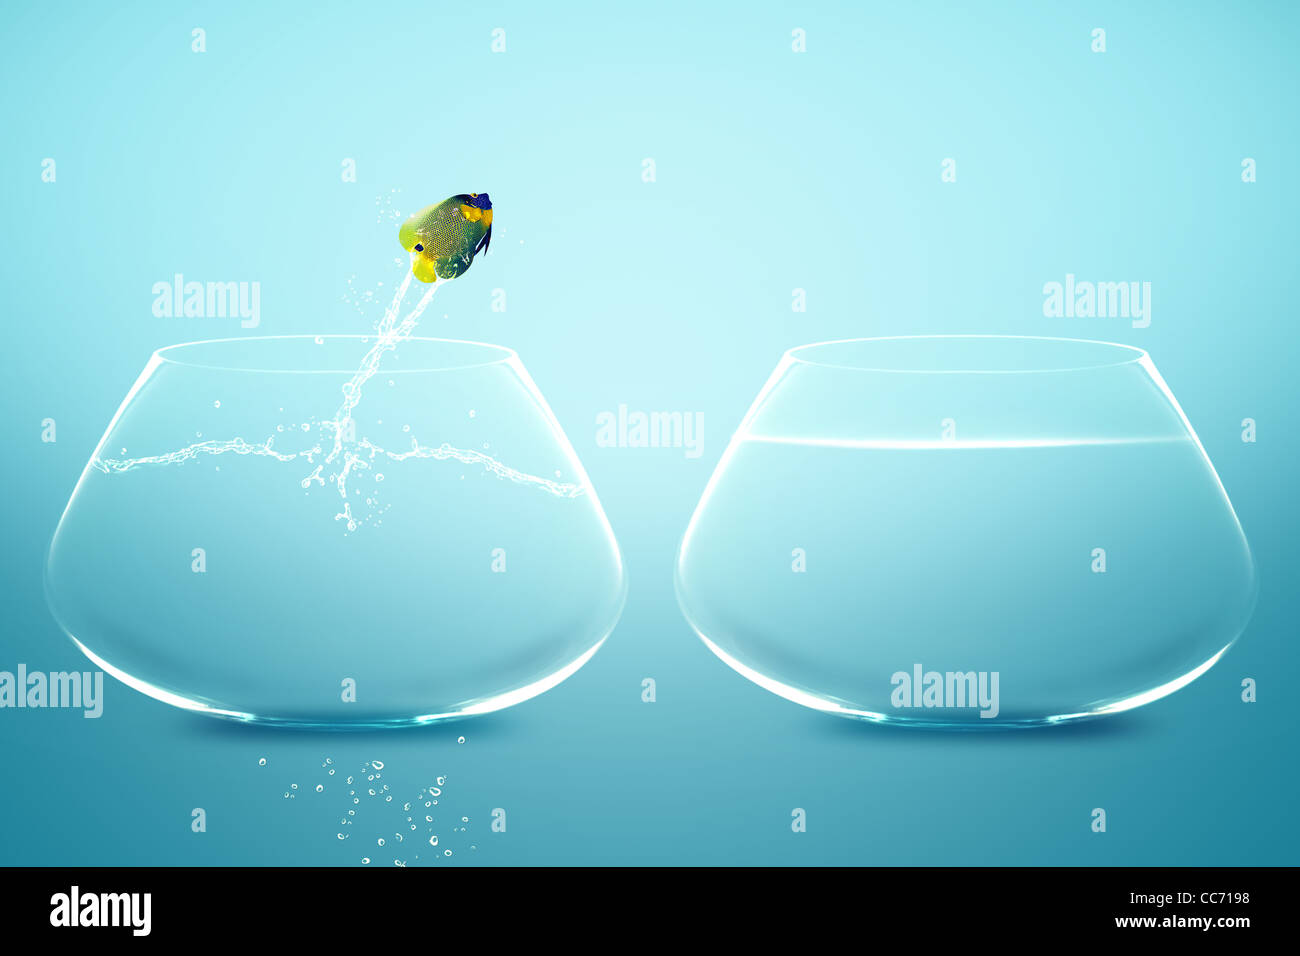 Anglefish jumping to Big bowl, Good Concept for new life, Big Opprtunity, Ambition and challenge concept. Stock Photo